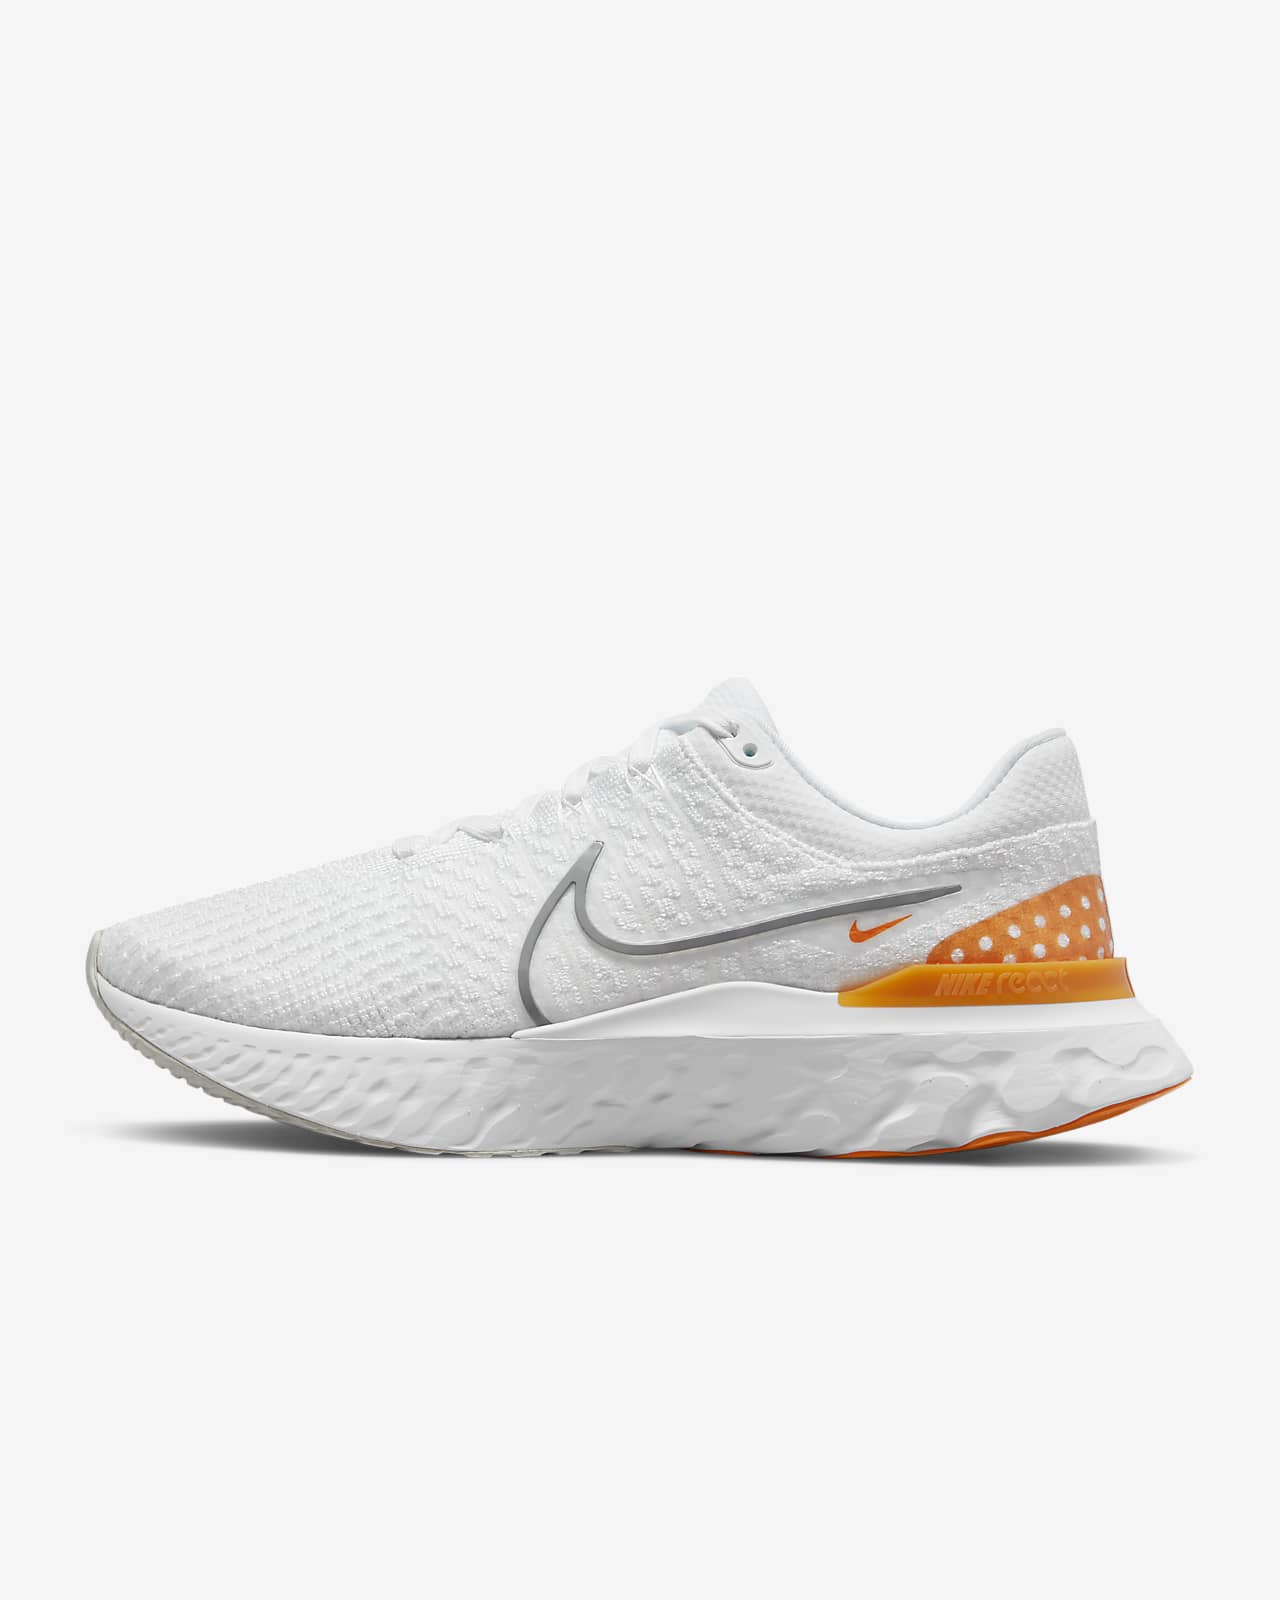 Chaussure de running sur route Nike React Infinity Run Flyknit 3 pour Homme